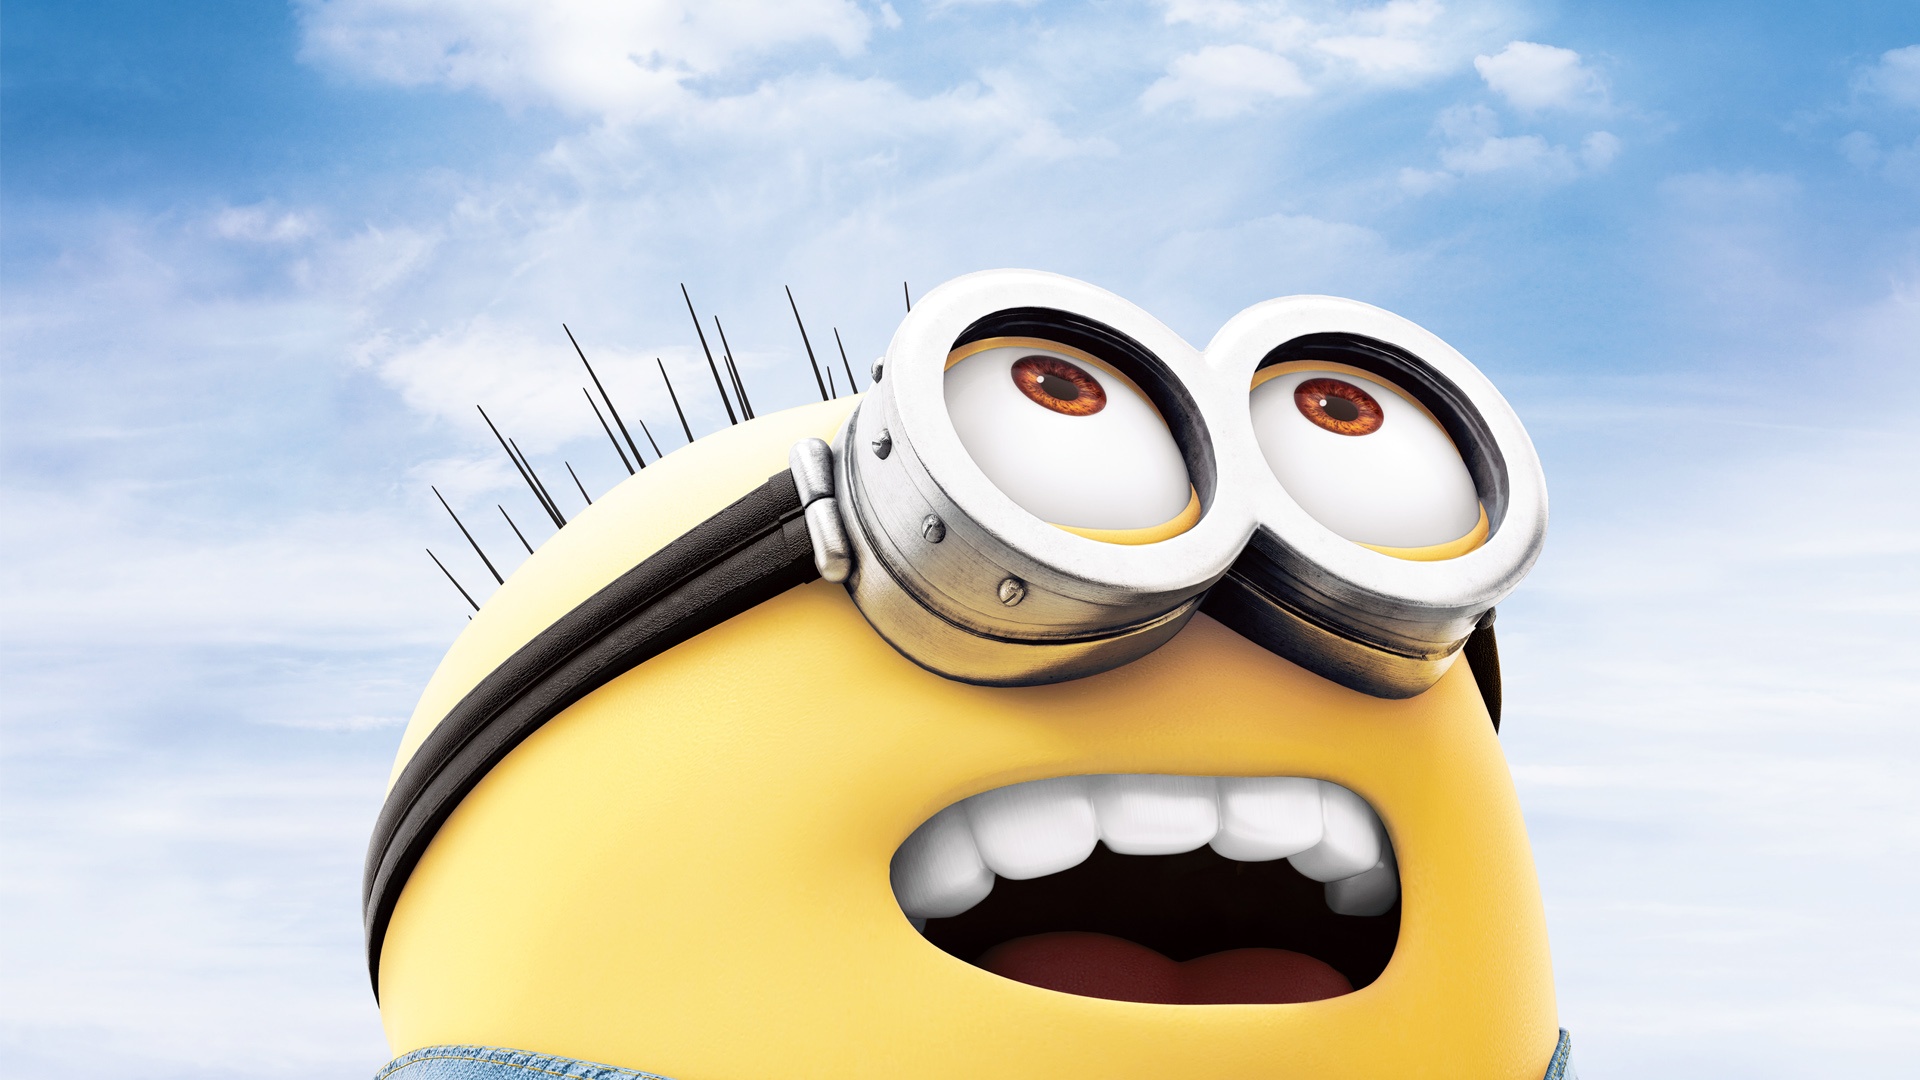 Minion in Despicable Me 2 Wallpapers | HD Wallpapers